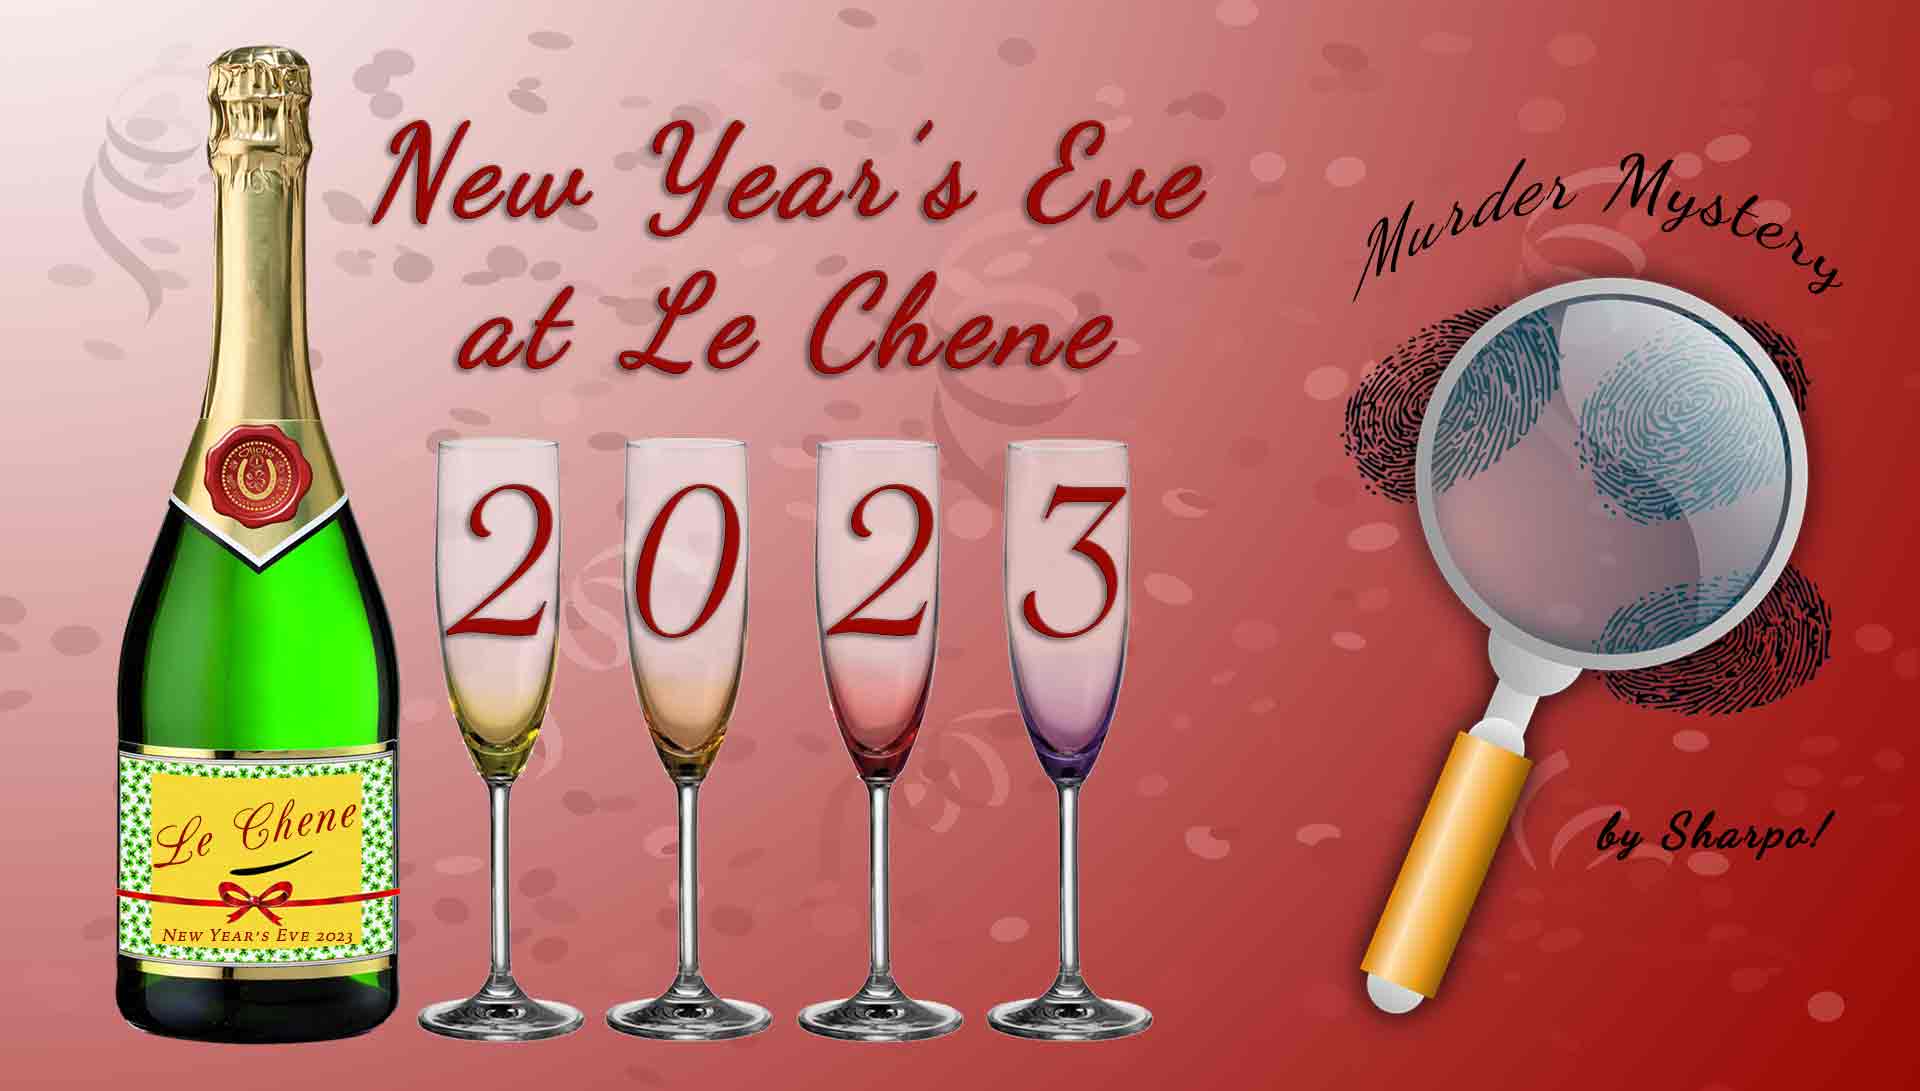 Le-Chene-New-Year's-Eve---2023-Murder-Mystery-Event-Image